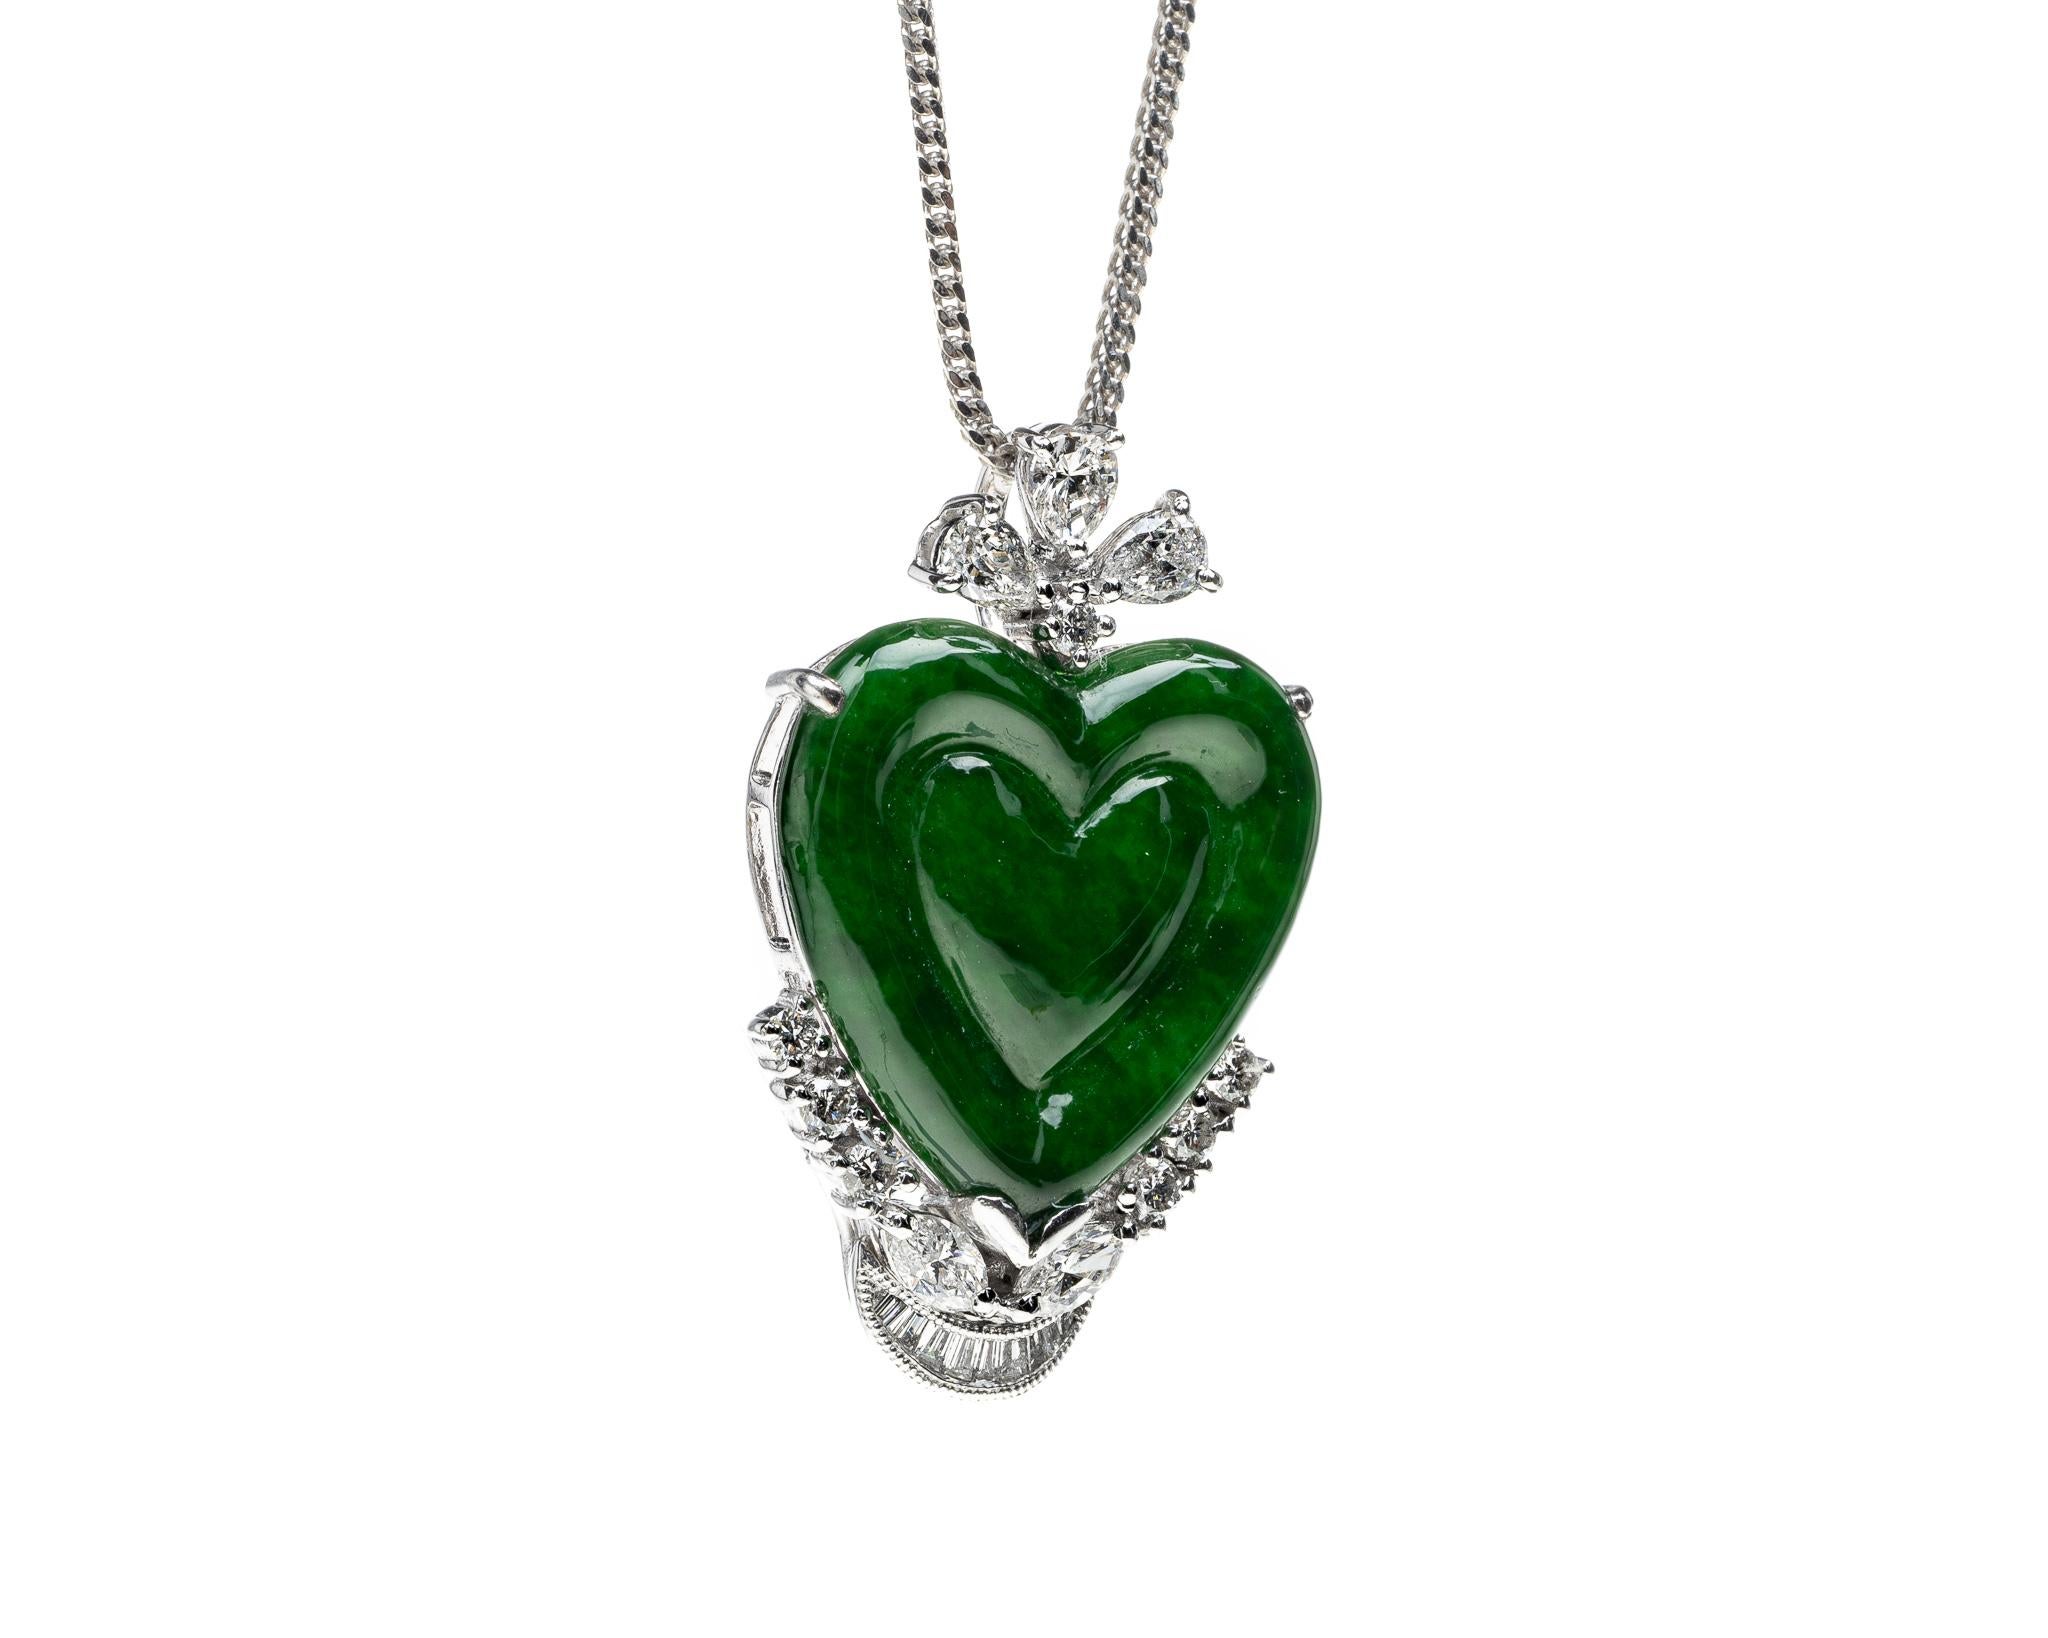 This is an all natural, untreated Imperial green jadeite jade carved heart.  It is set in an 18K white gold diamond setting with round brilliant, pear and tapered baguette diamonds totaling 0.51 carat weights.  The heart carving symbolizes love and